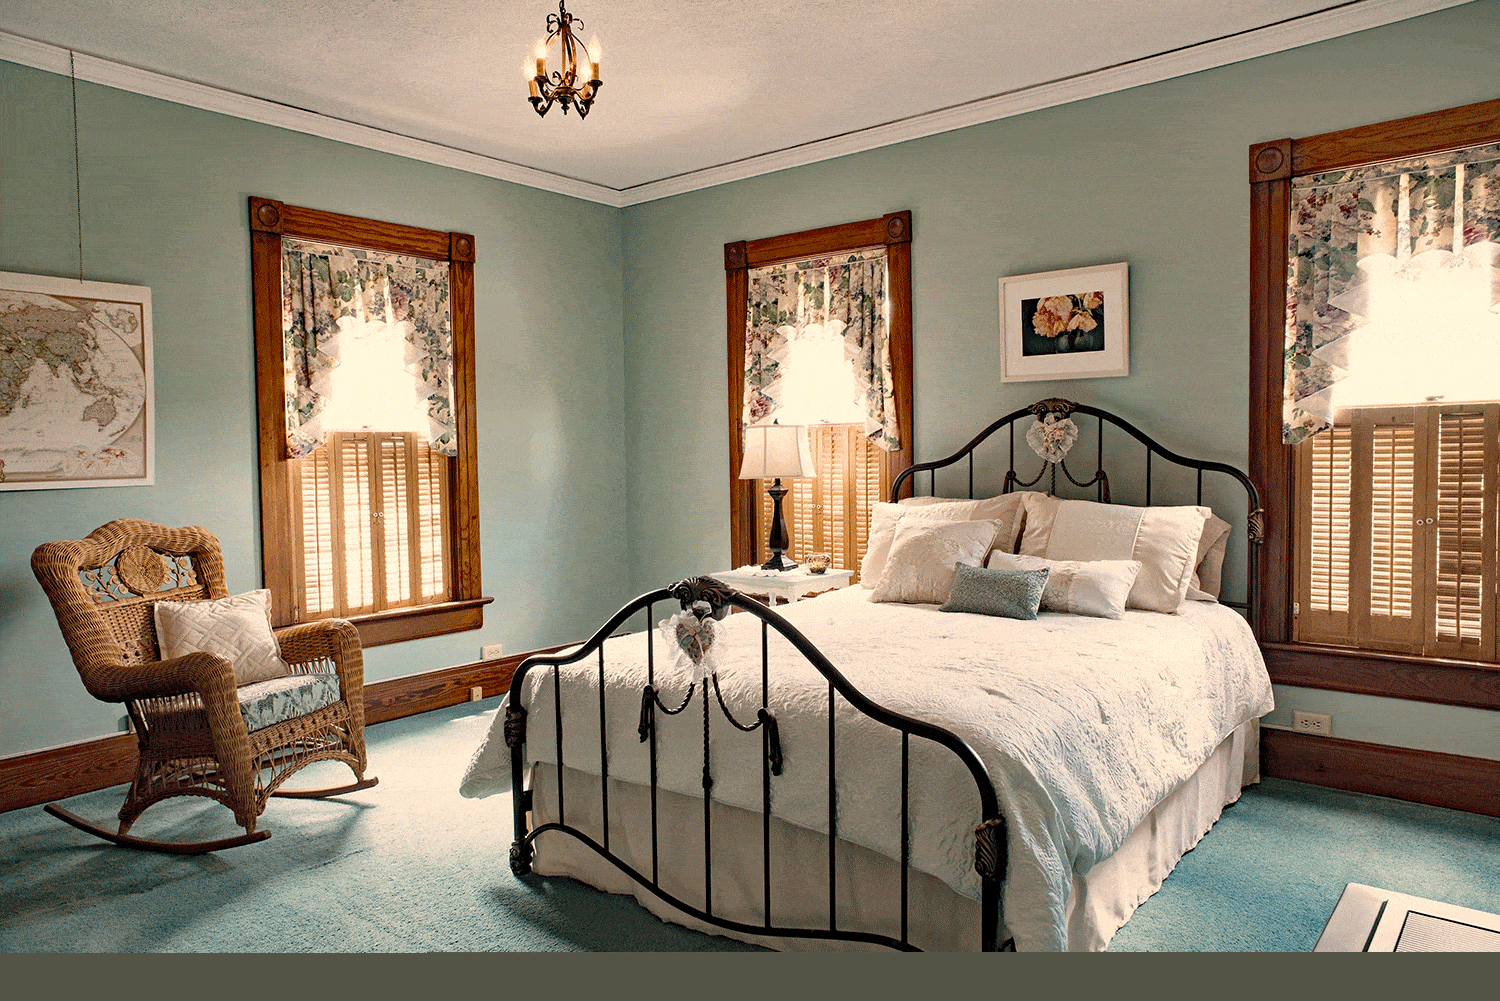 Iron Bed in Teal Bedroom od Old Victorian Home